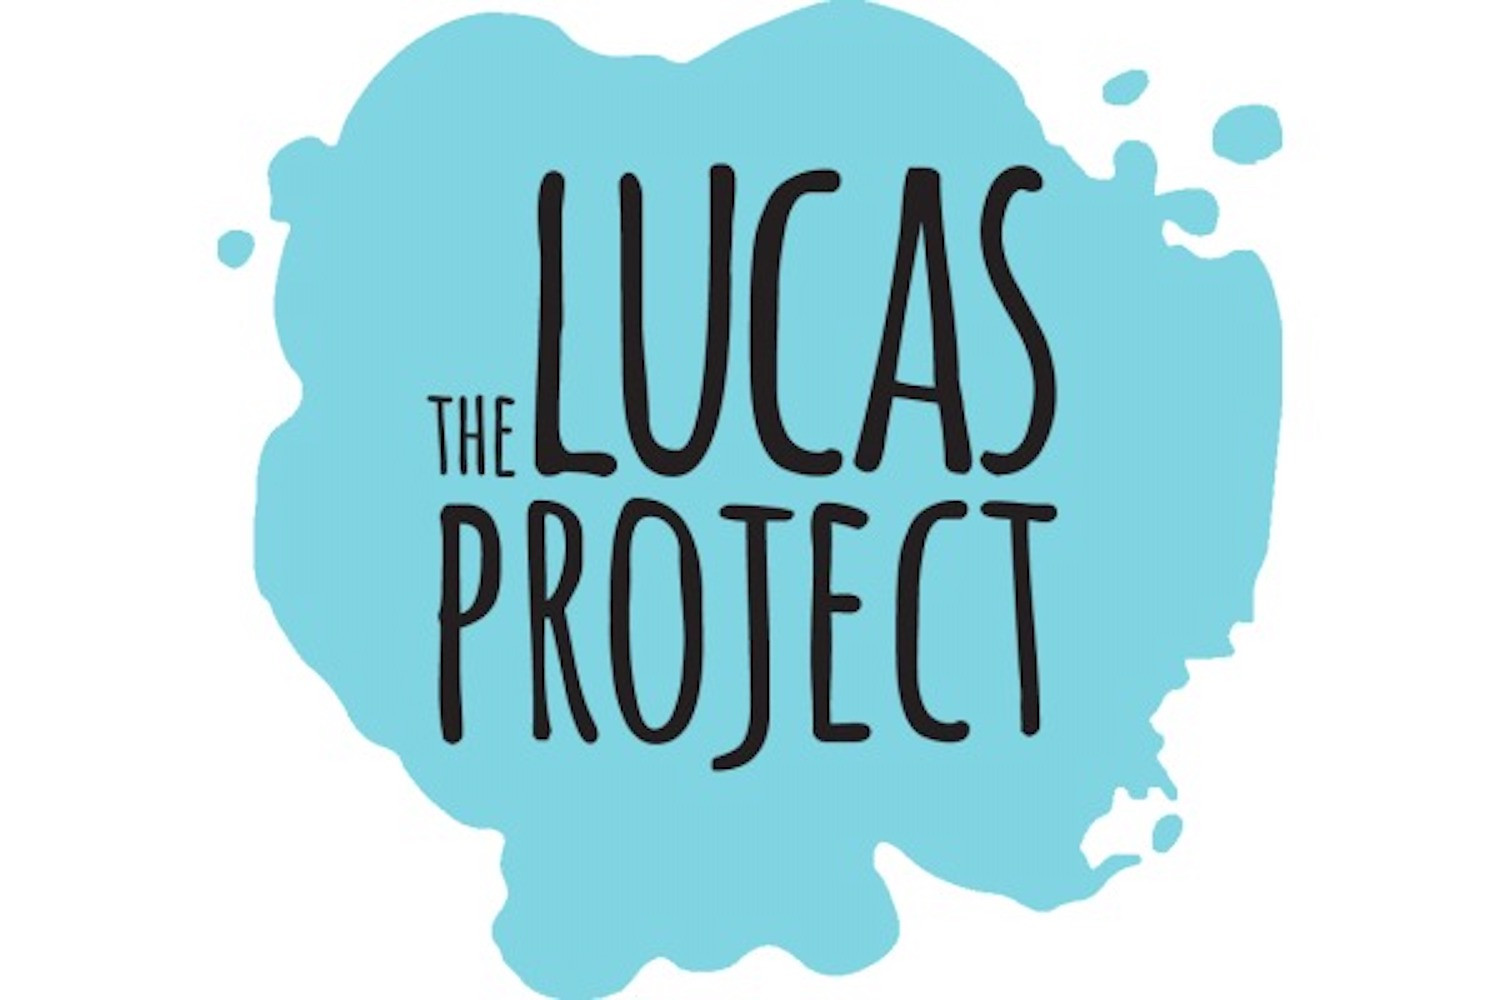 The Lucas Project